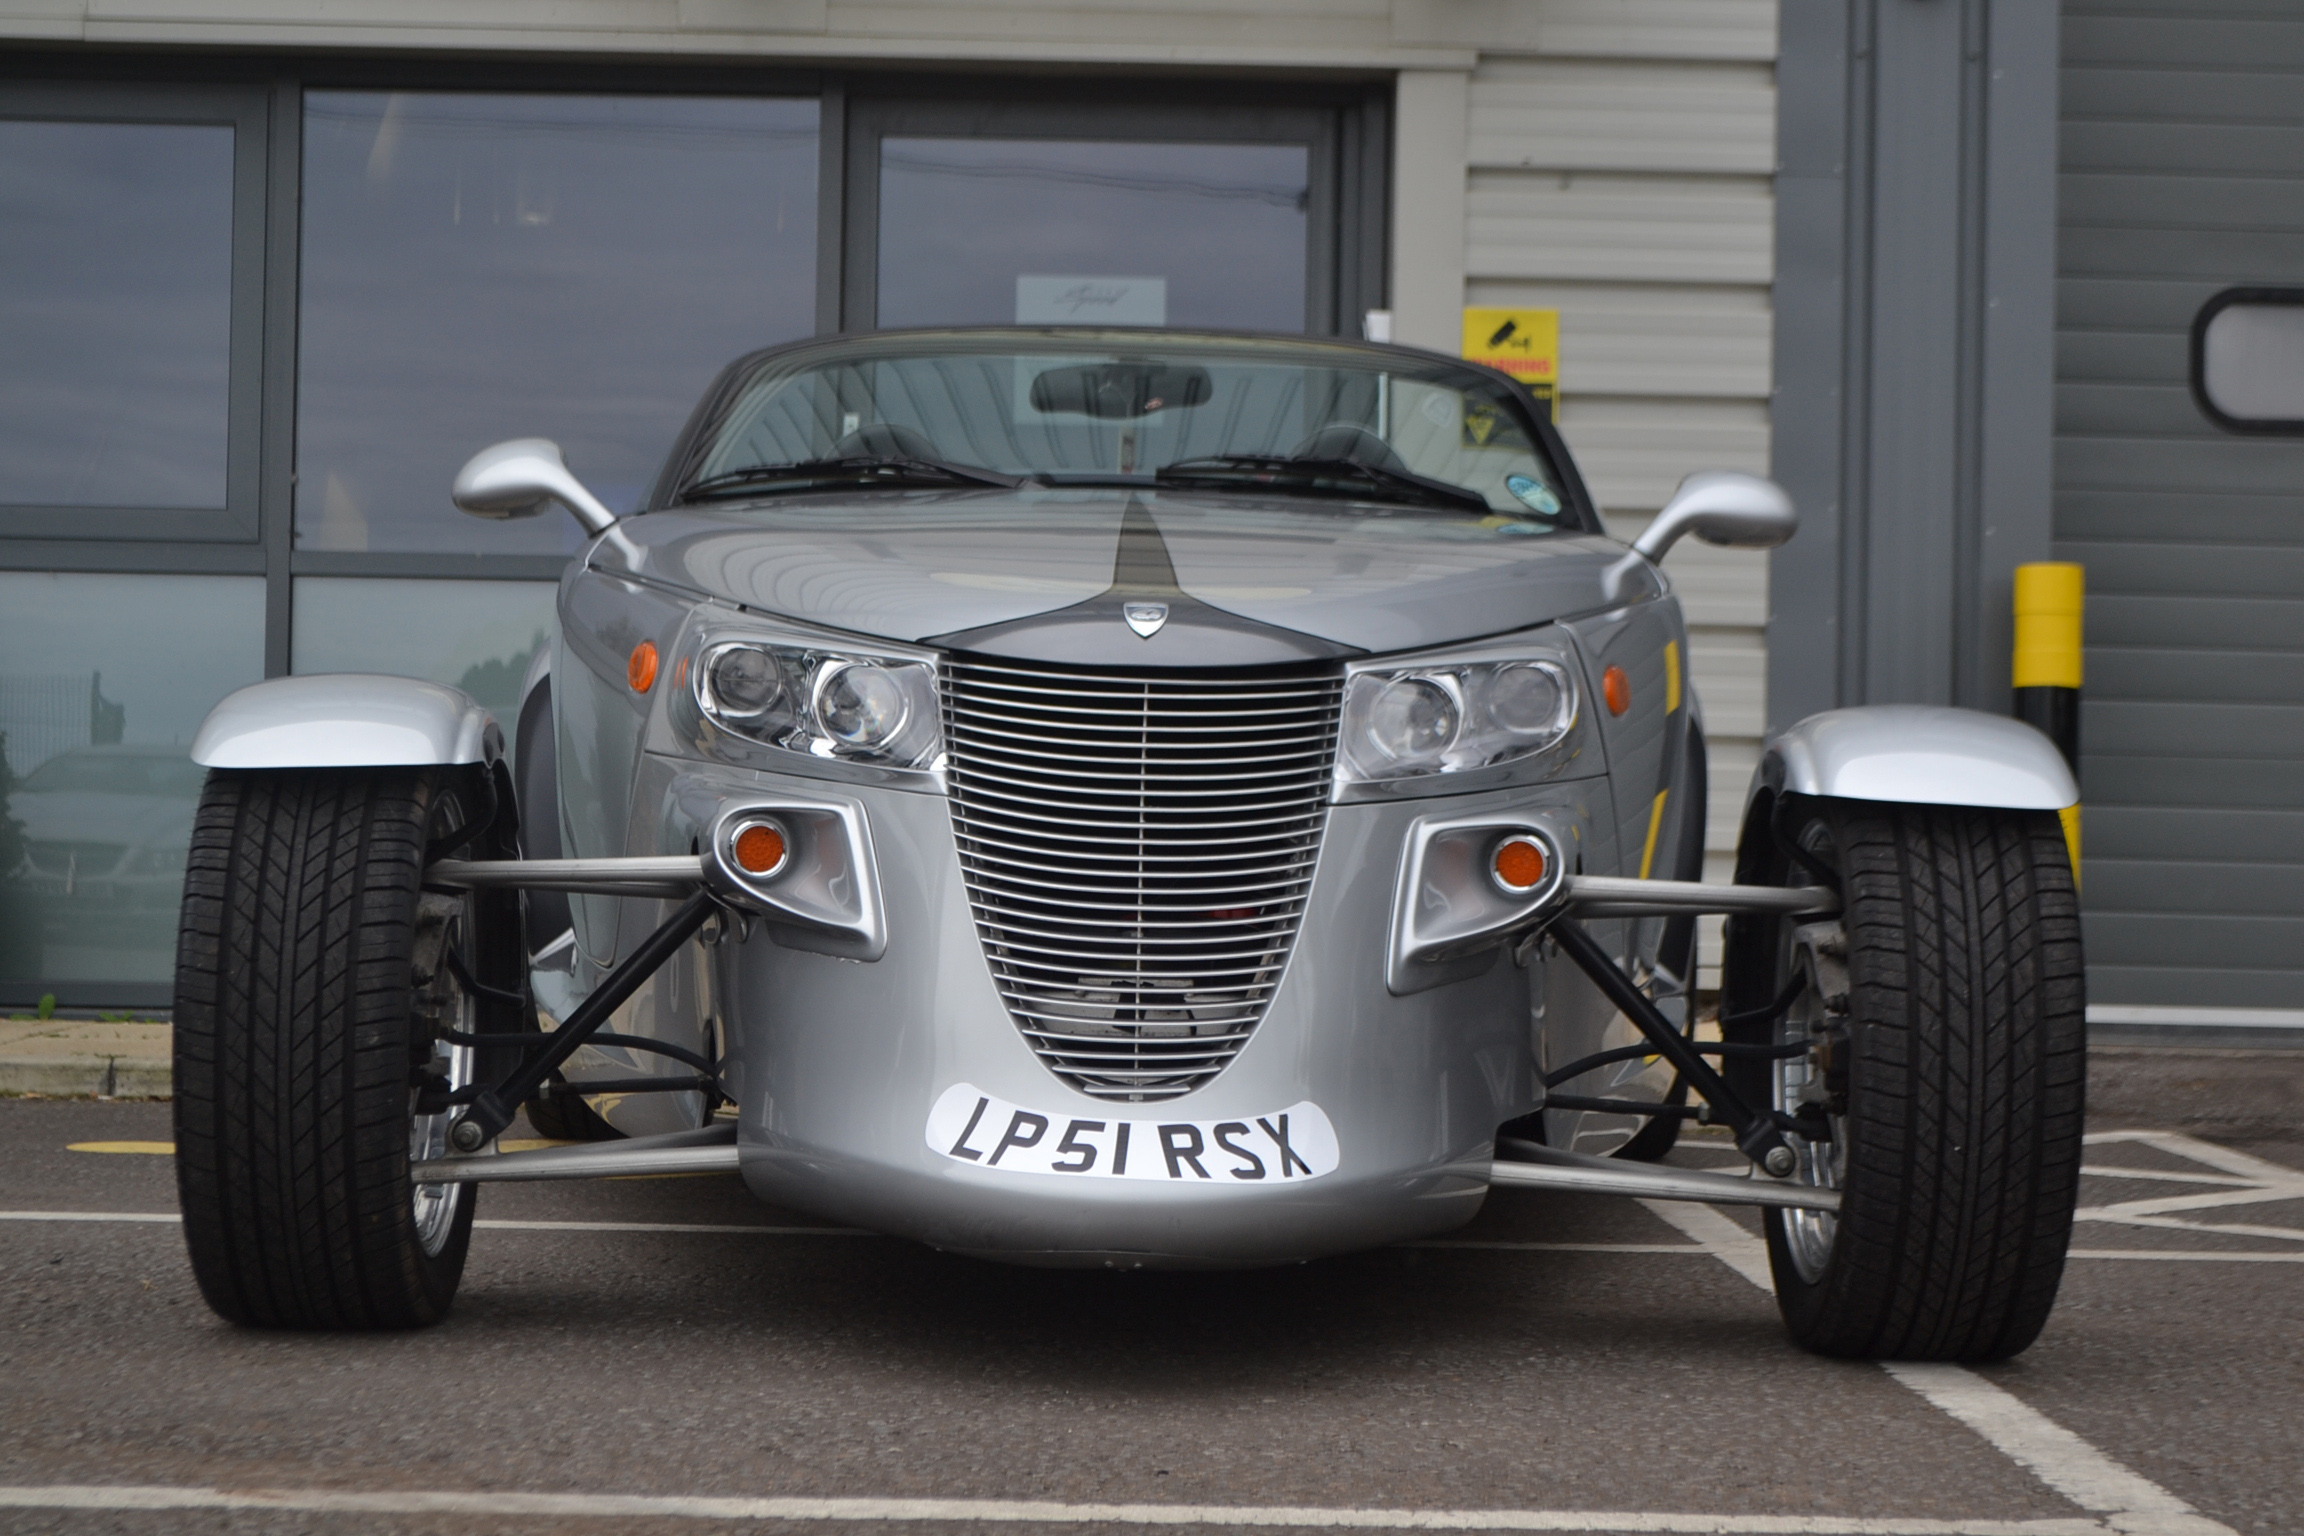 Plymouth prowler 2010 - Image 3 of 6